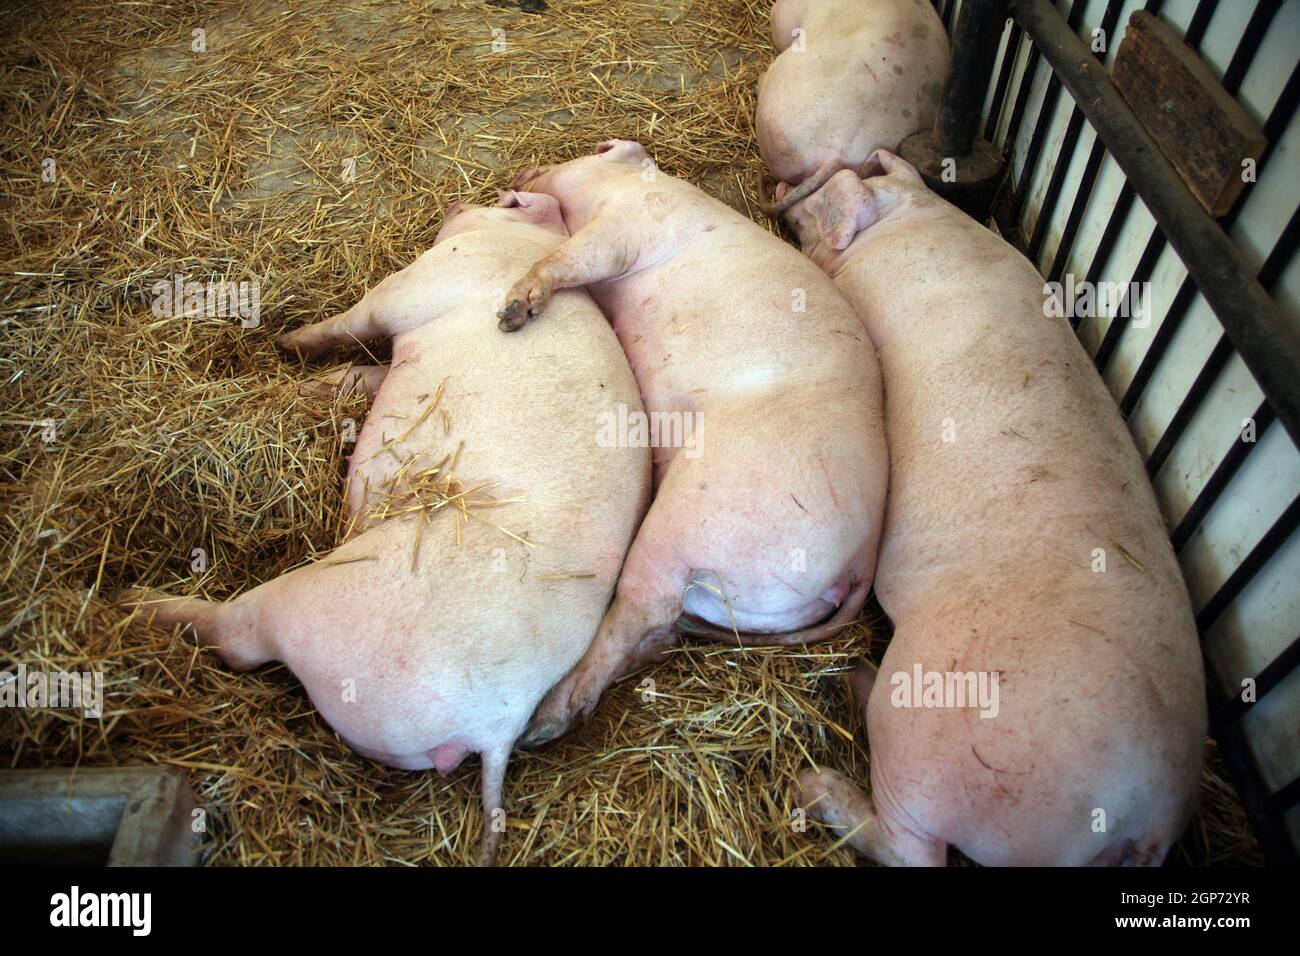 Pigs exhibited at the fair in Bjelovar, Croatia Stock Photo